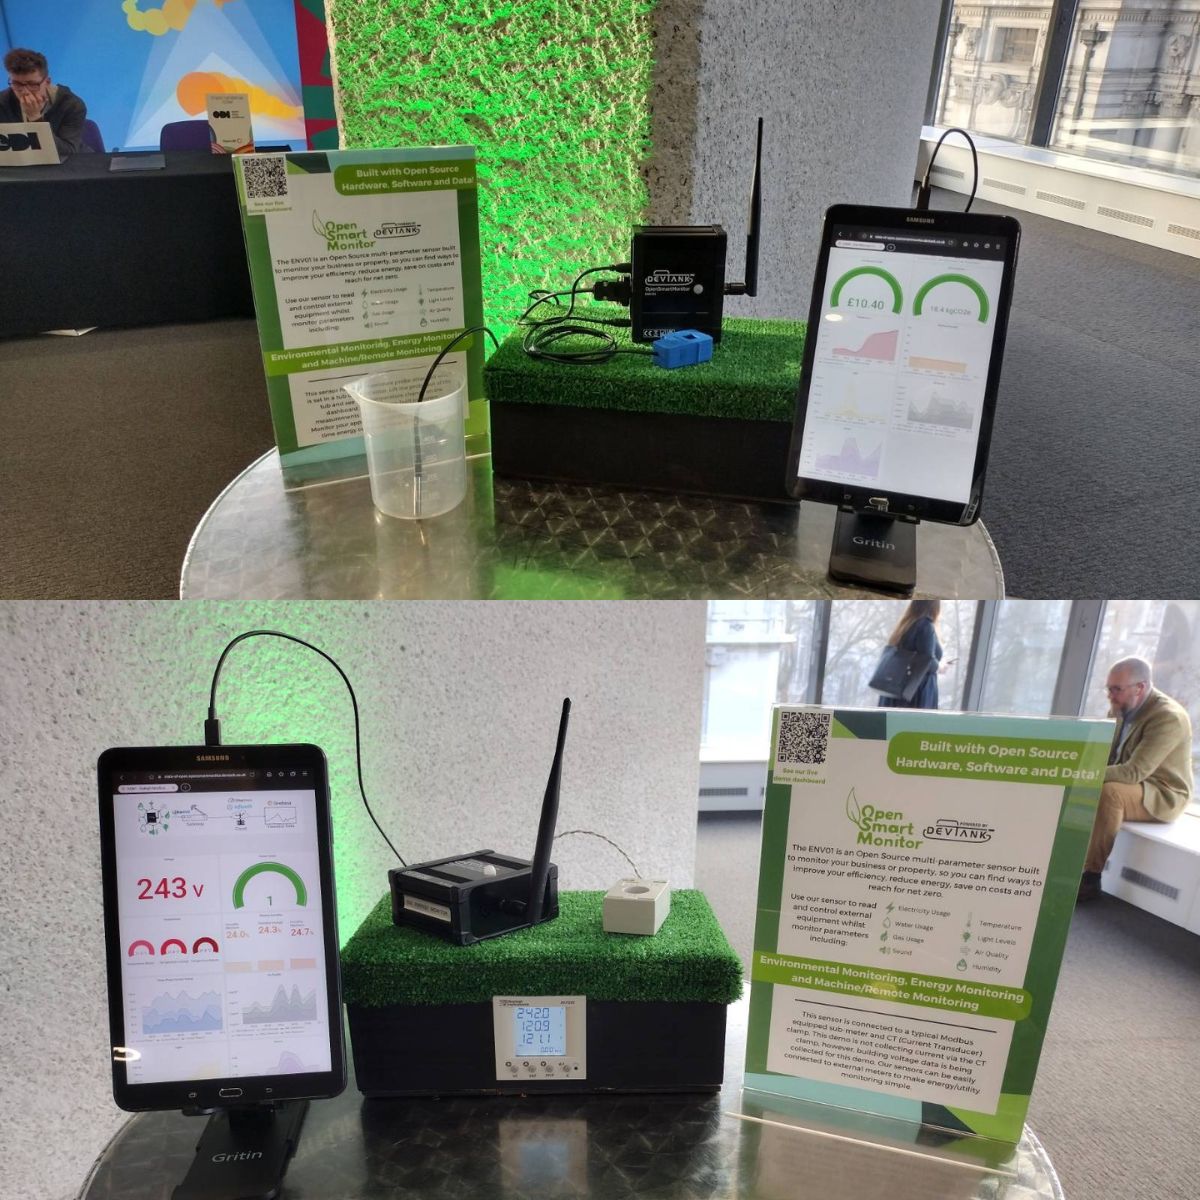 Finally! It's time for #stateofopencon 2023! Come and have a chat with us on the 4th floor. Also, you may find our sensors dotted around the building! They are set up to collect environmental data as well as fun interactive extras.
#opensource #opensourcedata #devtank